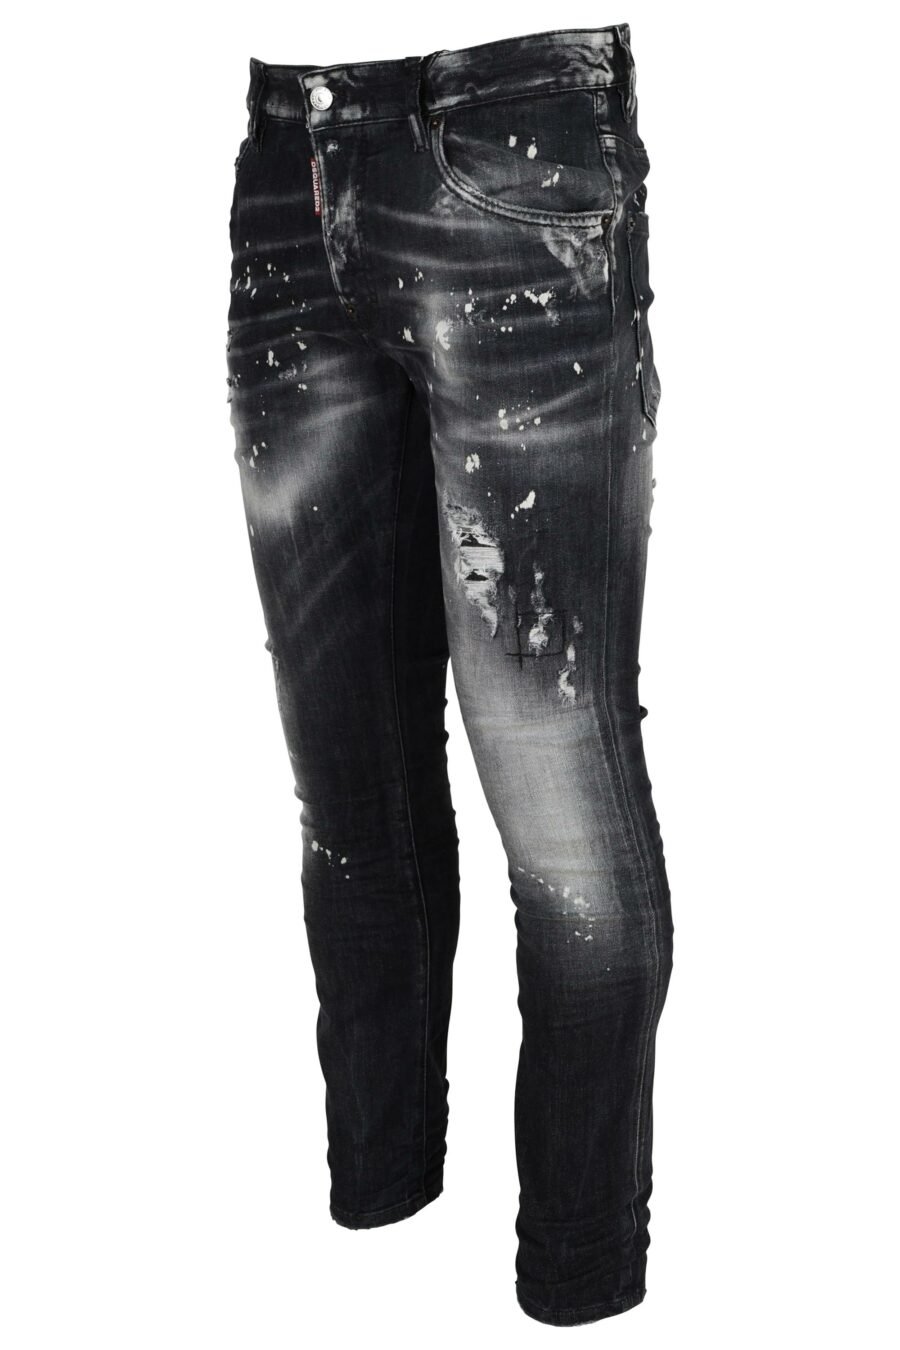 Black jeans "super twinky jean" with rips and semi-worn - 8054148473945 1